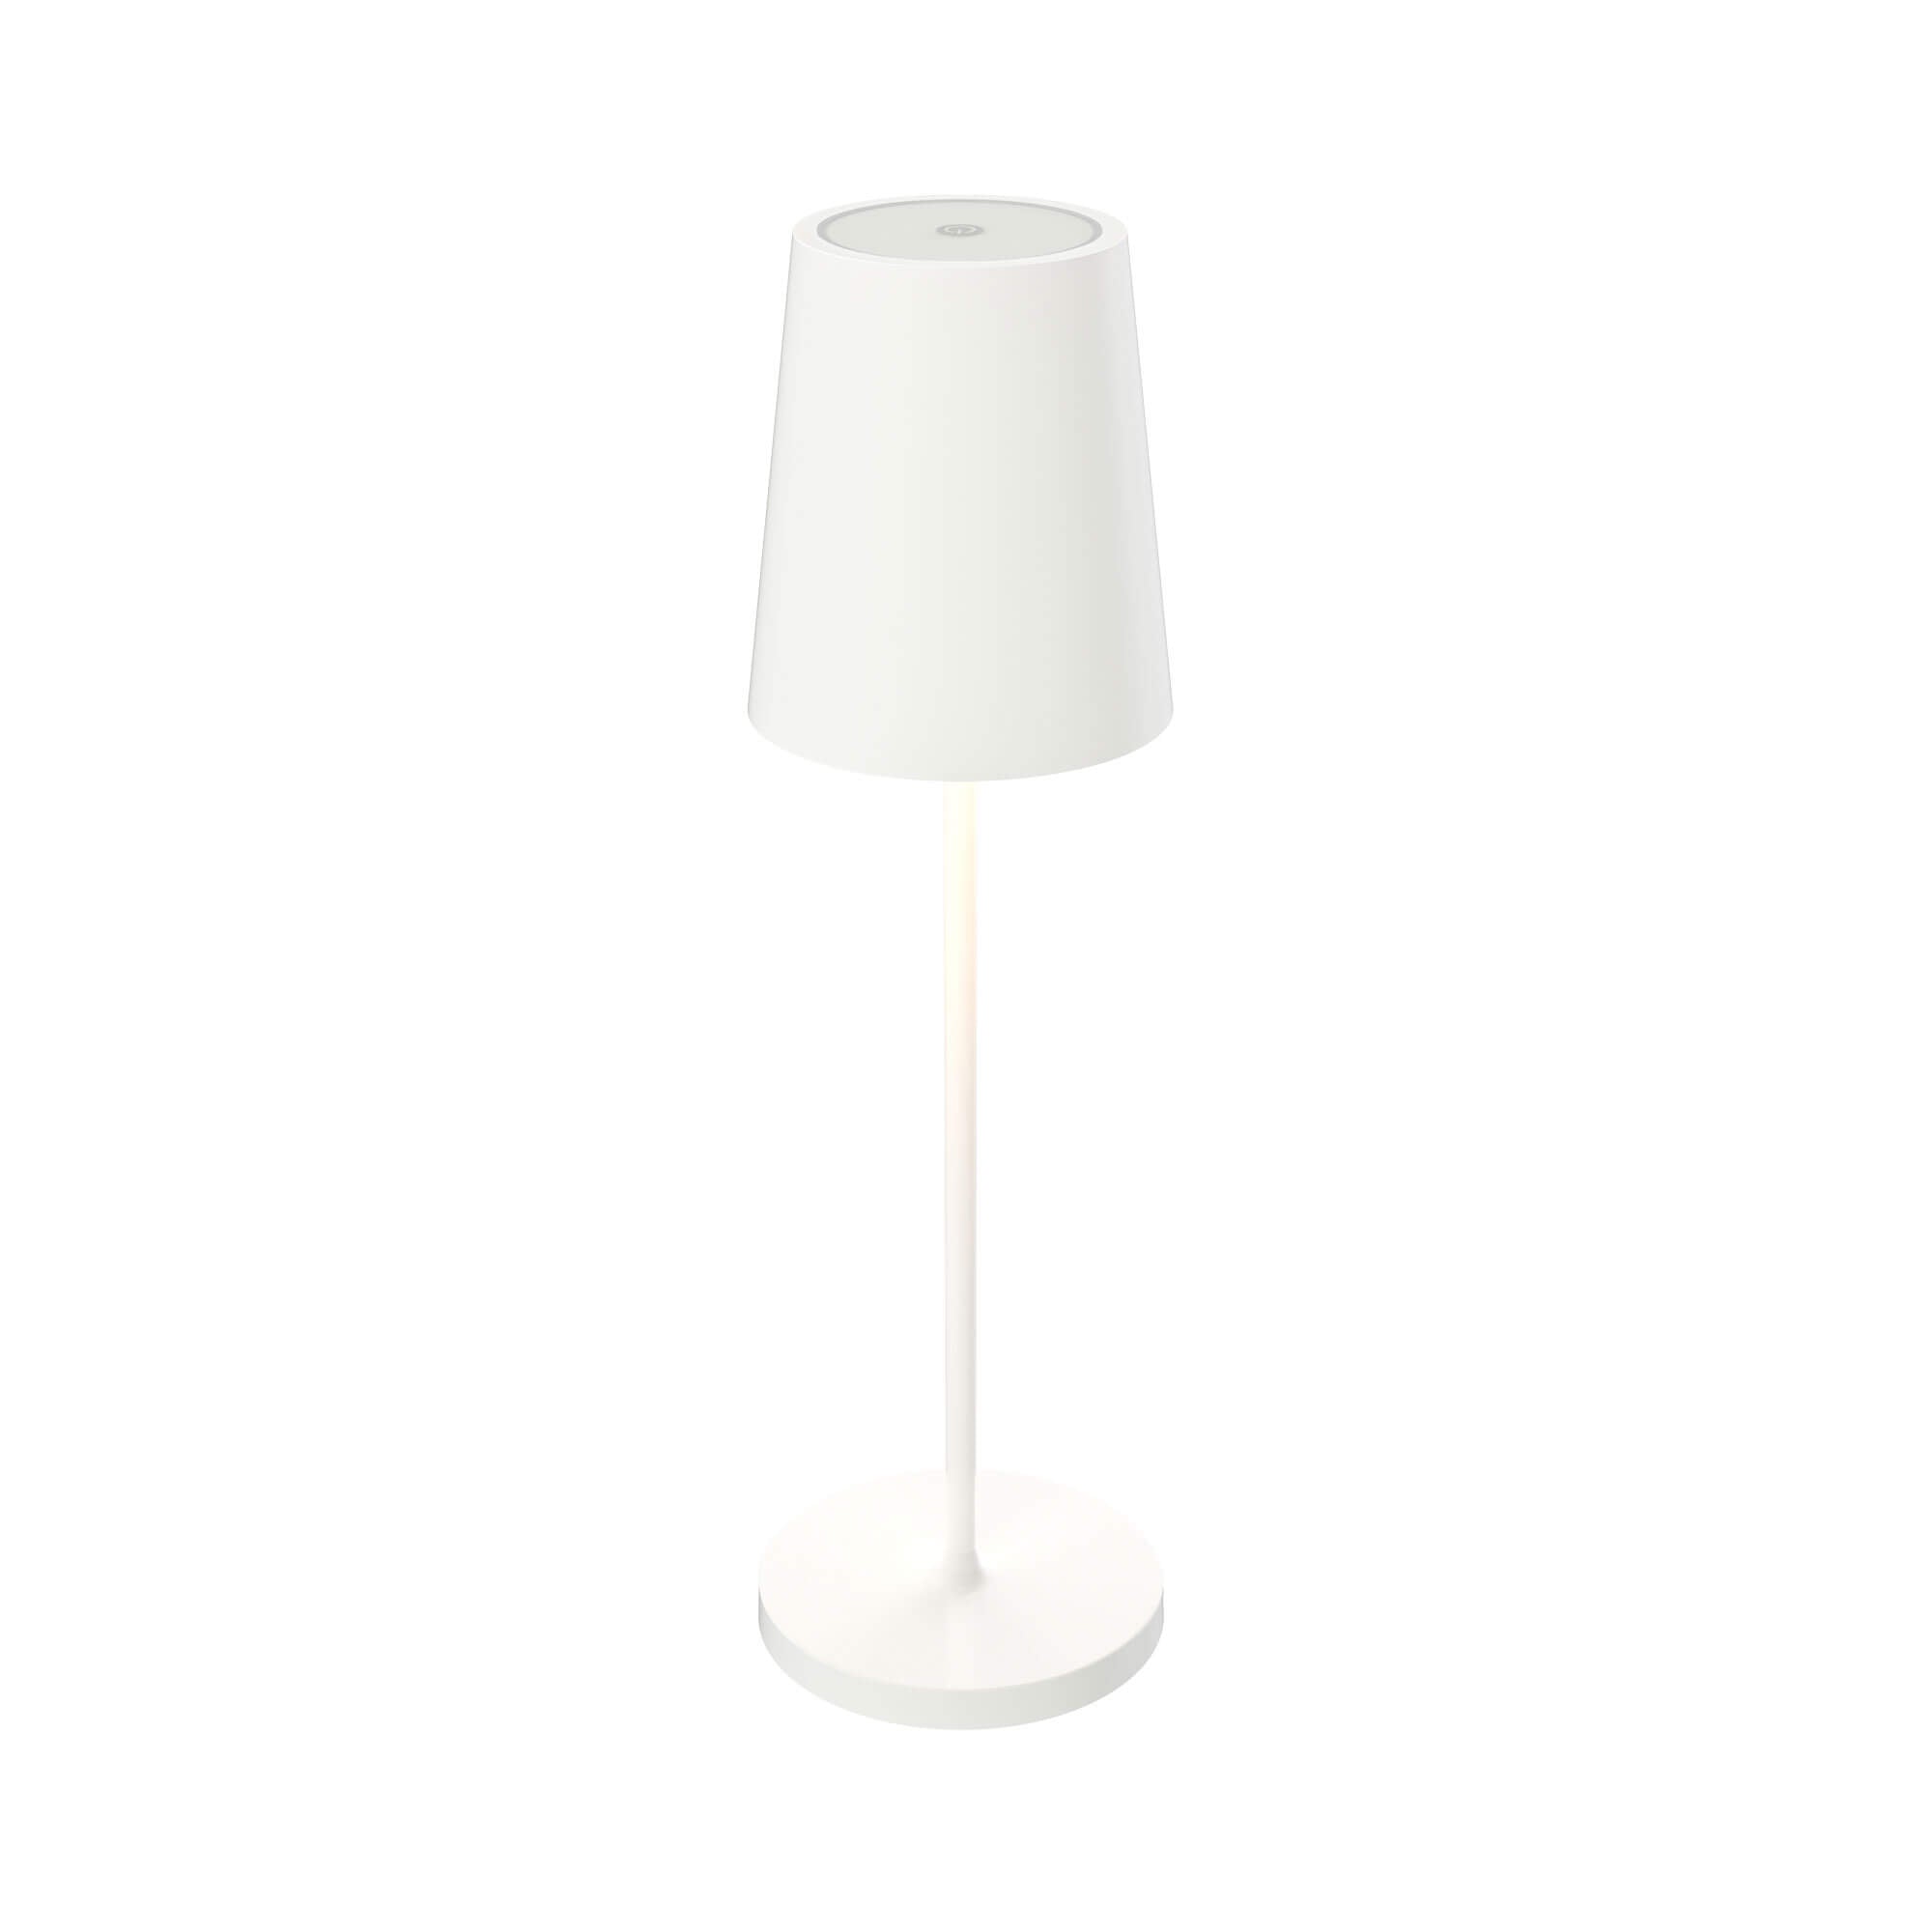 GLAM Lampe sur table Blanc - RTL-3C-WH | DALS